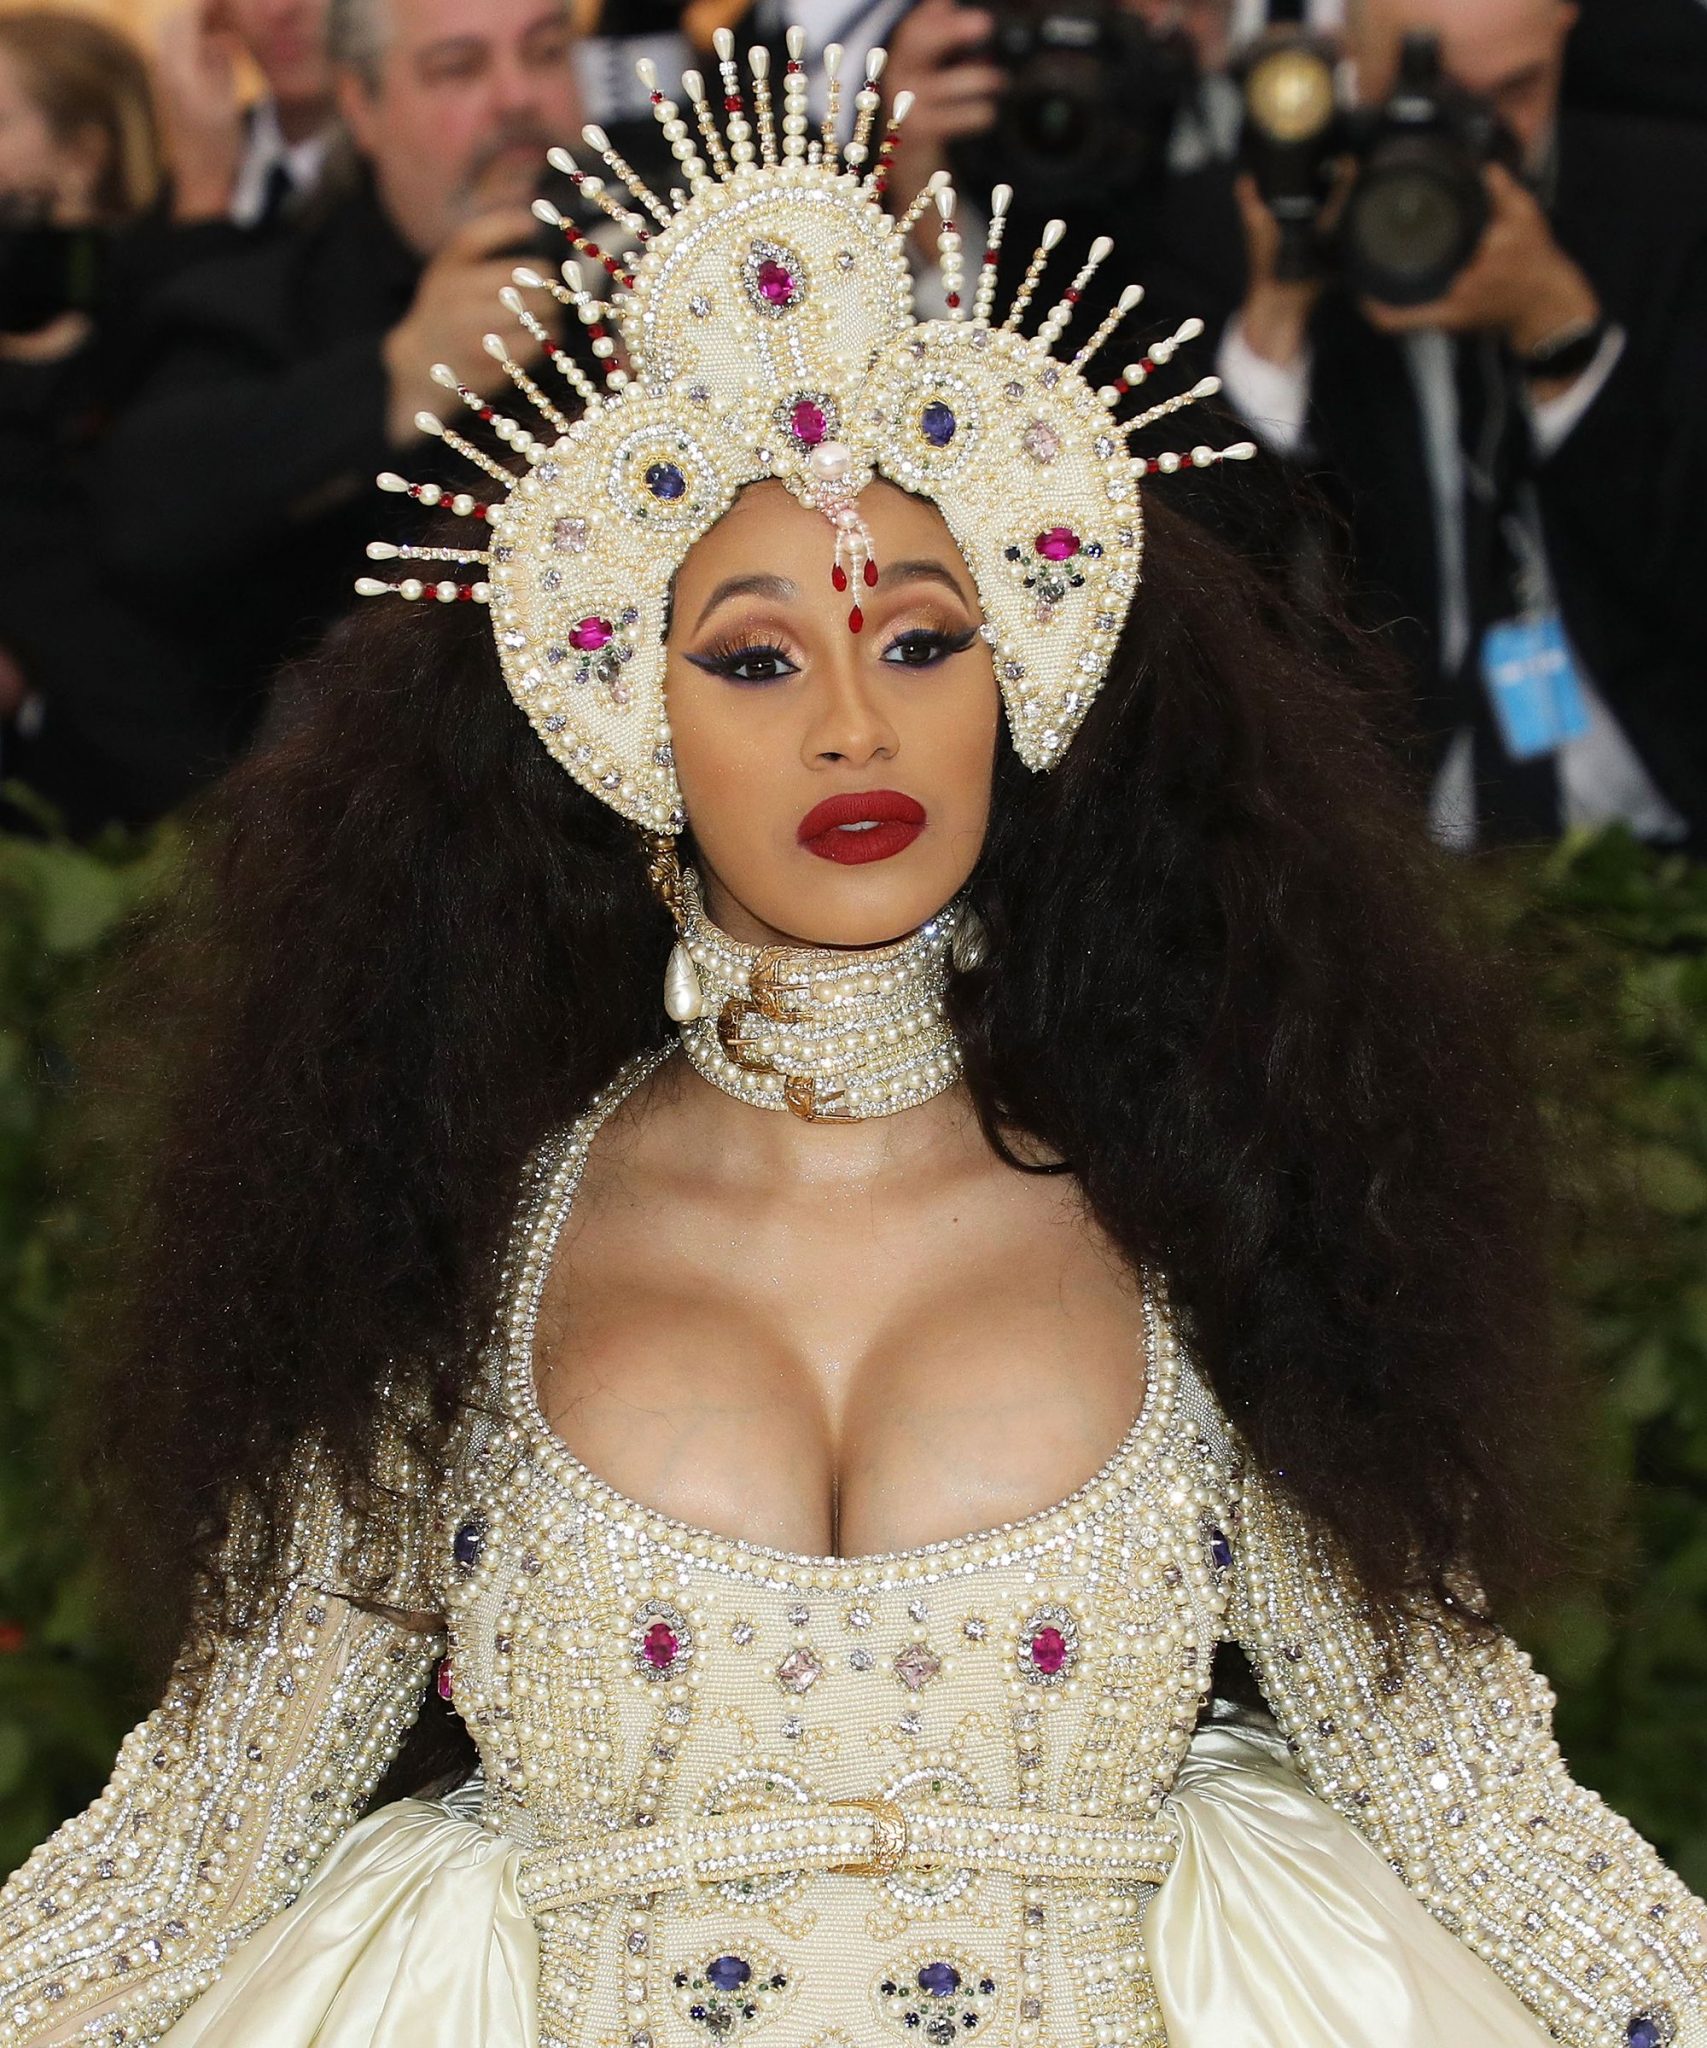 7 cardi b halloween costumes that’ll make you the life of the party